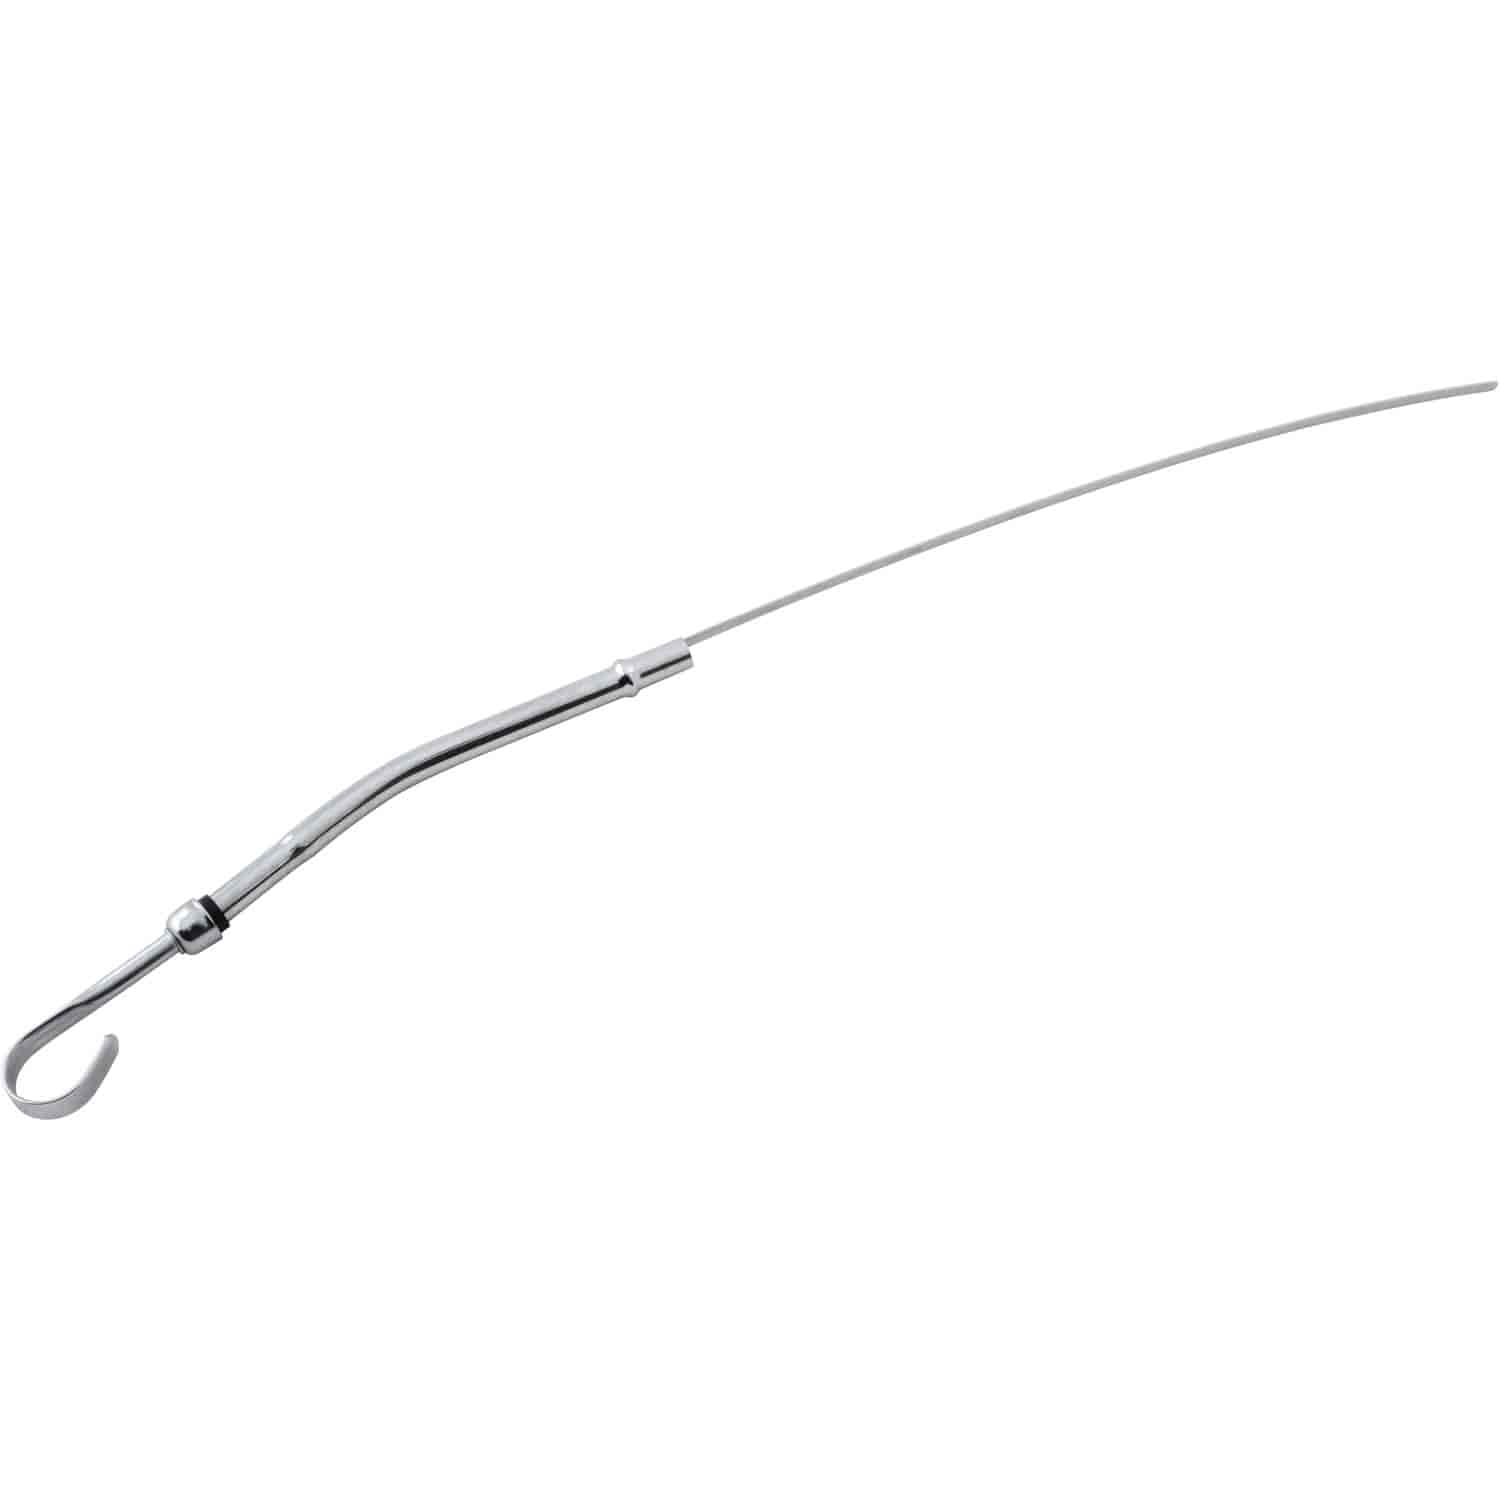 Fits 1955-1977 Small Block Chevy Engines For Driver Side Block Location Steel JEGS Chrome Engine Oil Dipstick 19” Long 